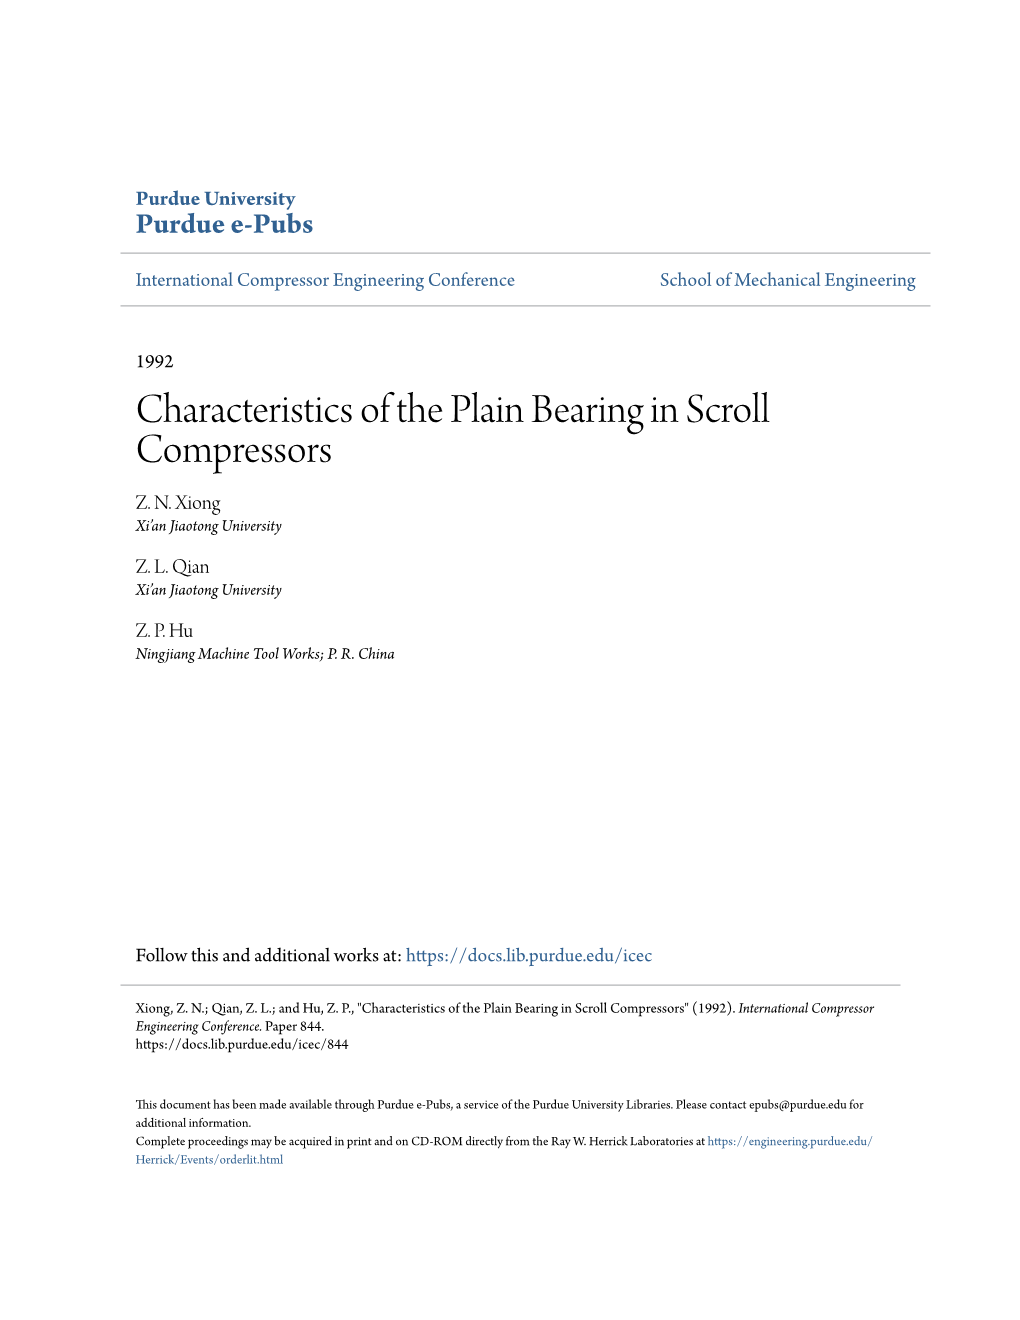 Characteristics of the Plain Bearing in Scroll Compressors Z